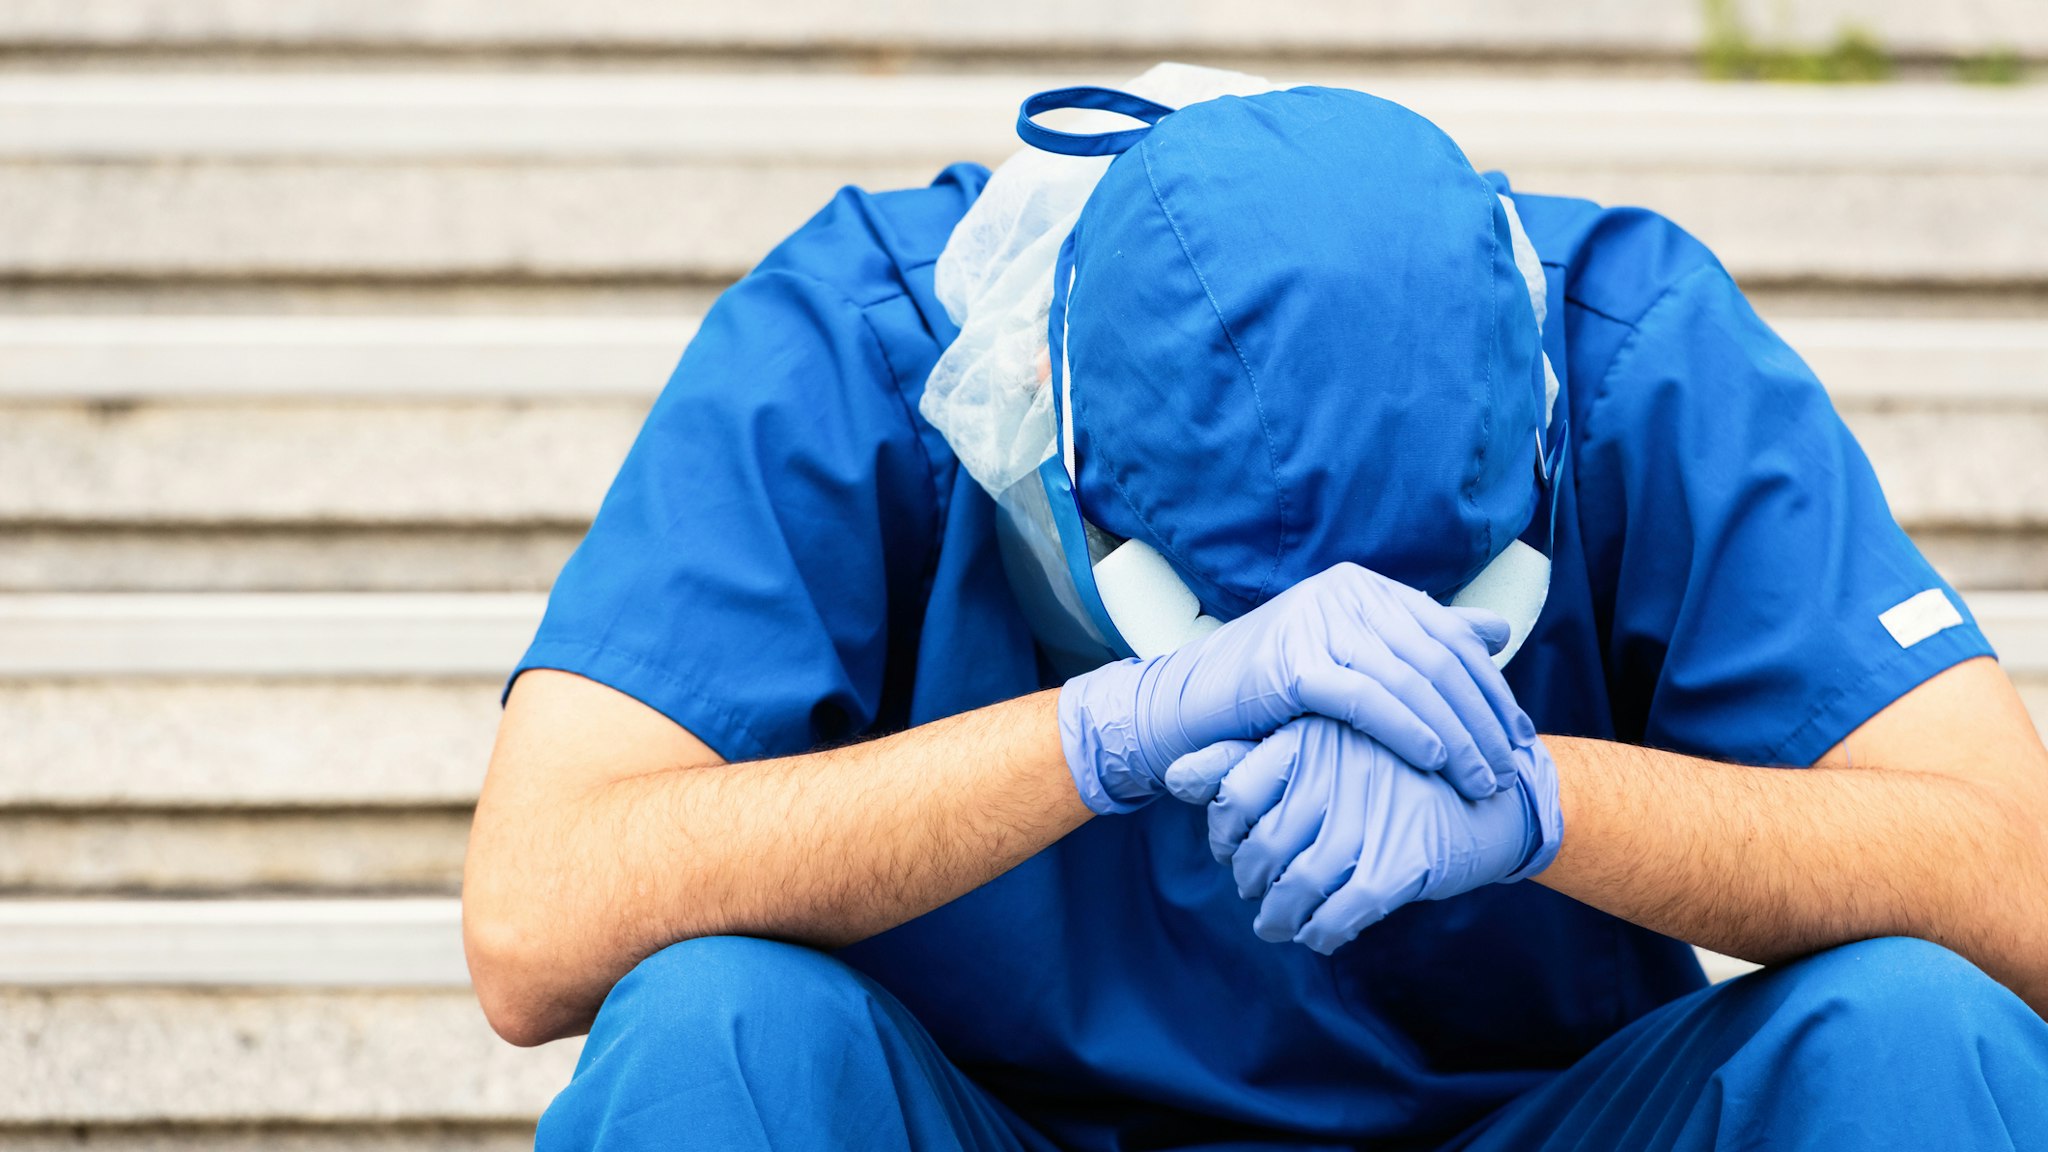 Serious, overworked, very sad male health care worker - stock photo